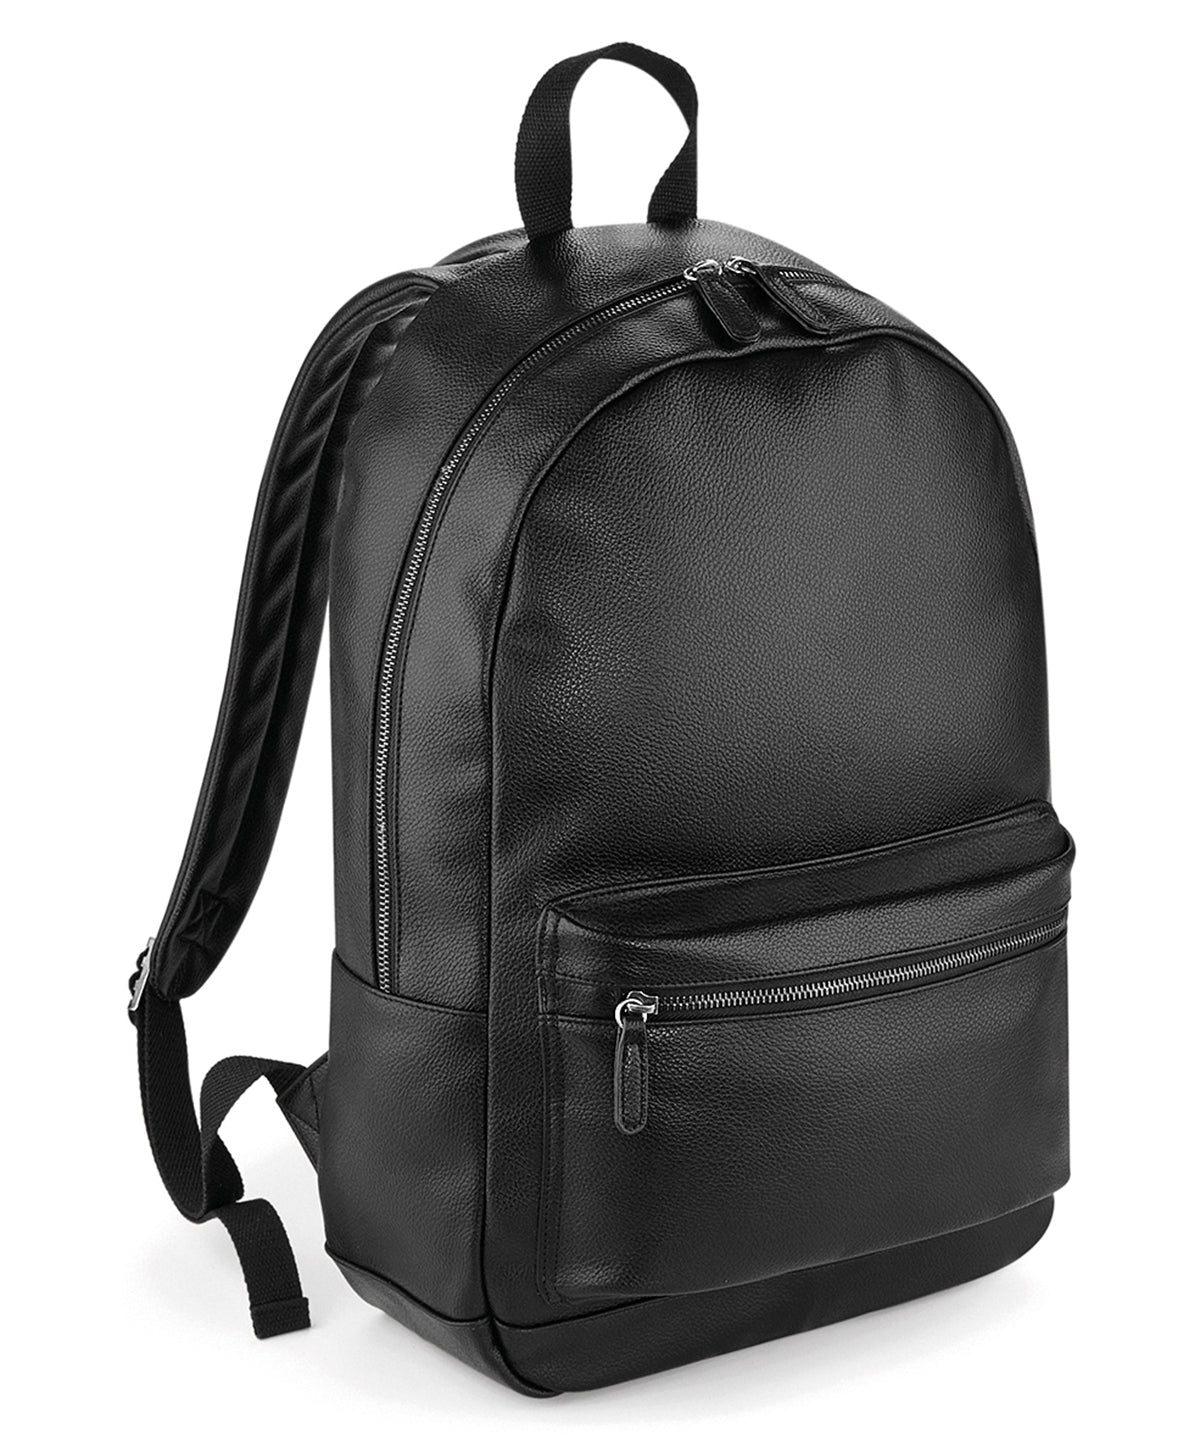 Personalised Bags - Black Bagbase Faux leather fashion backpack